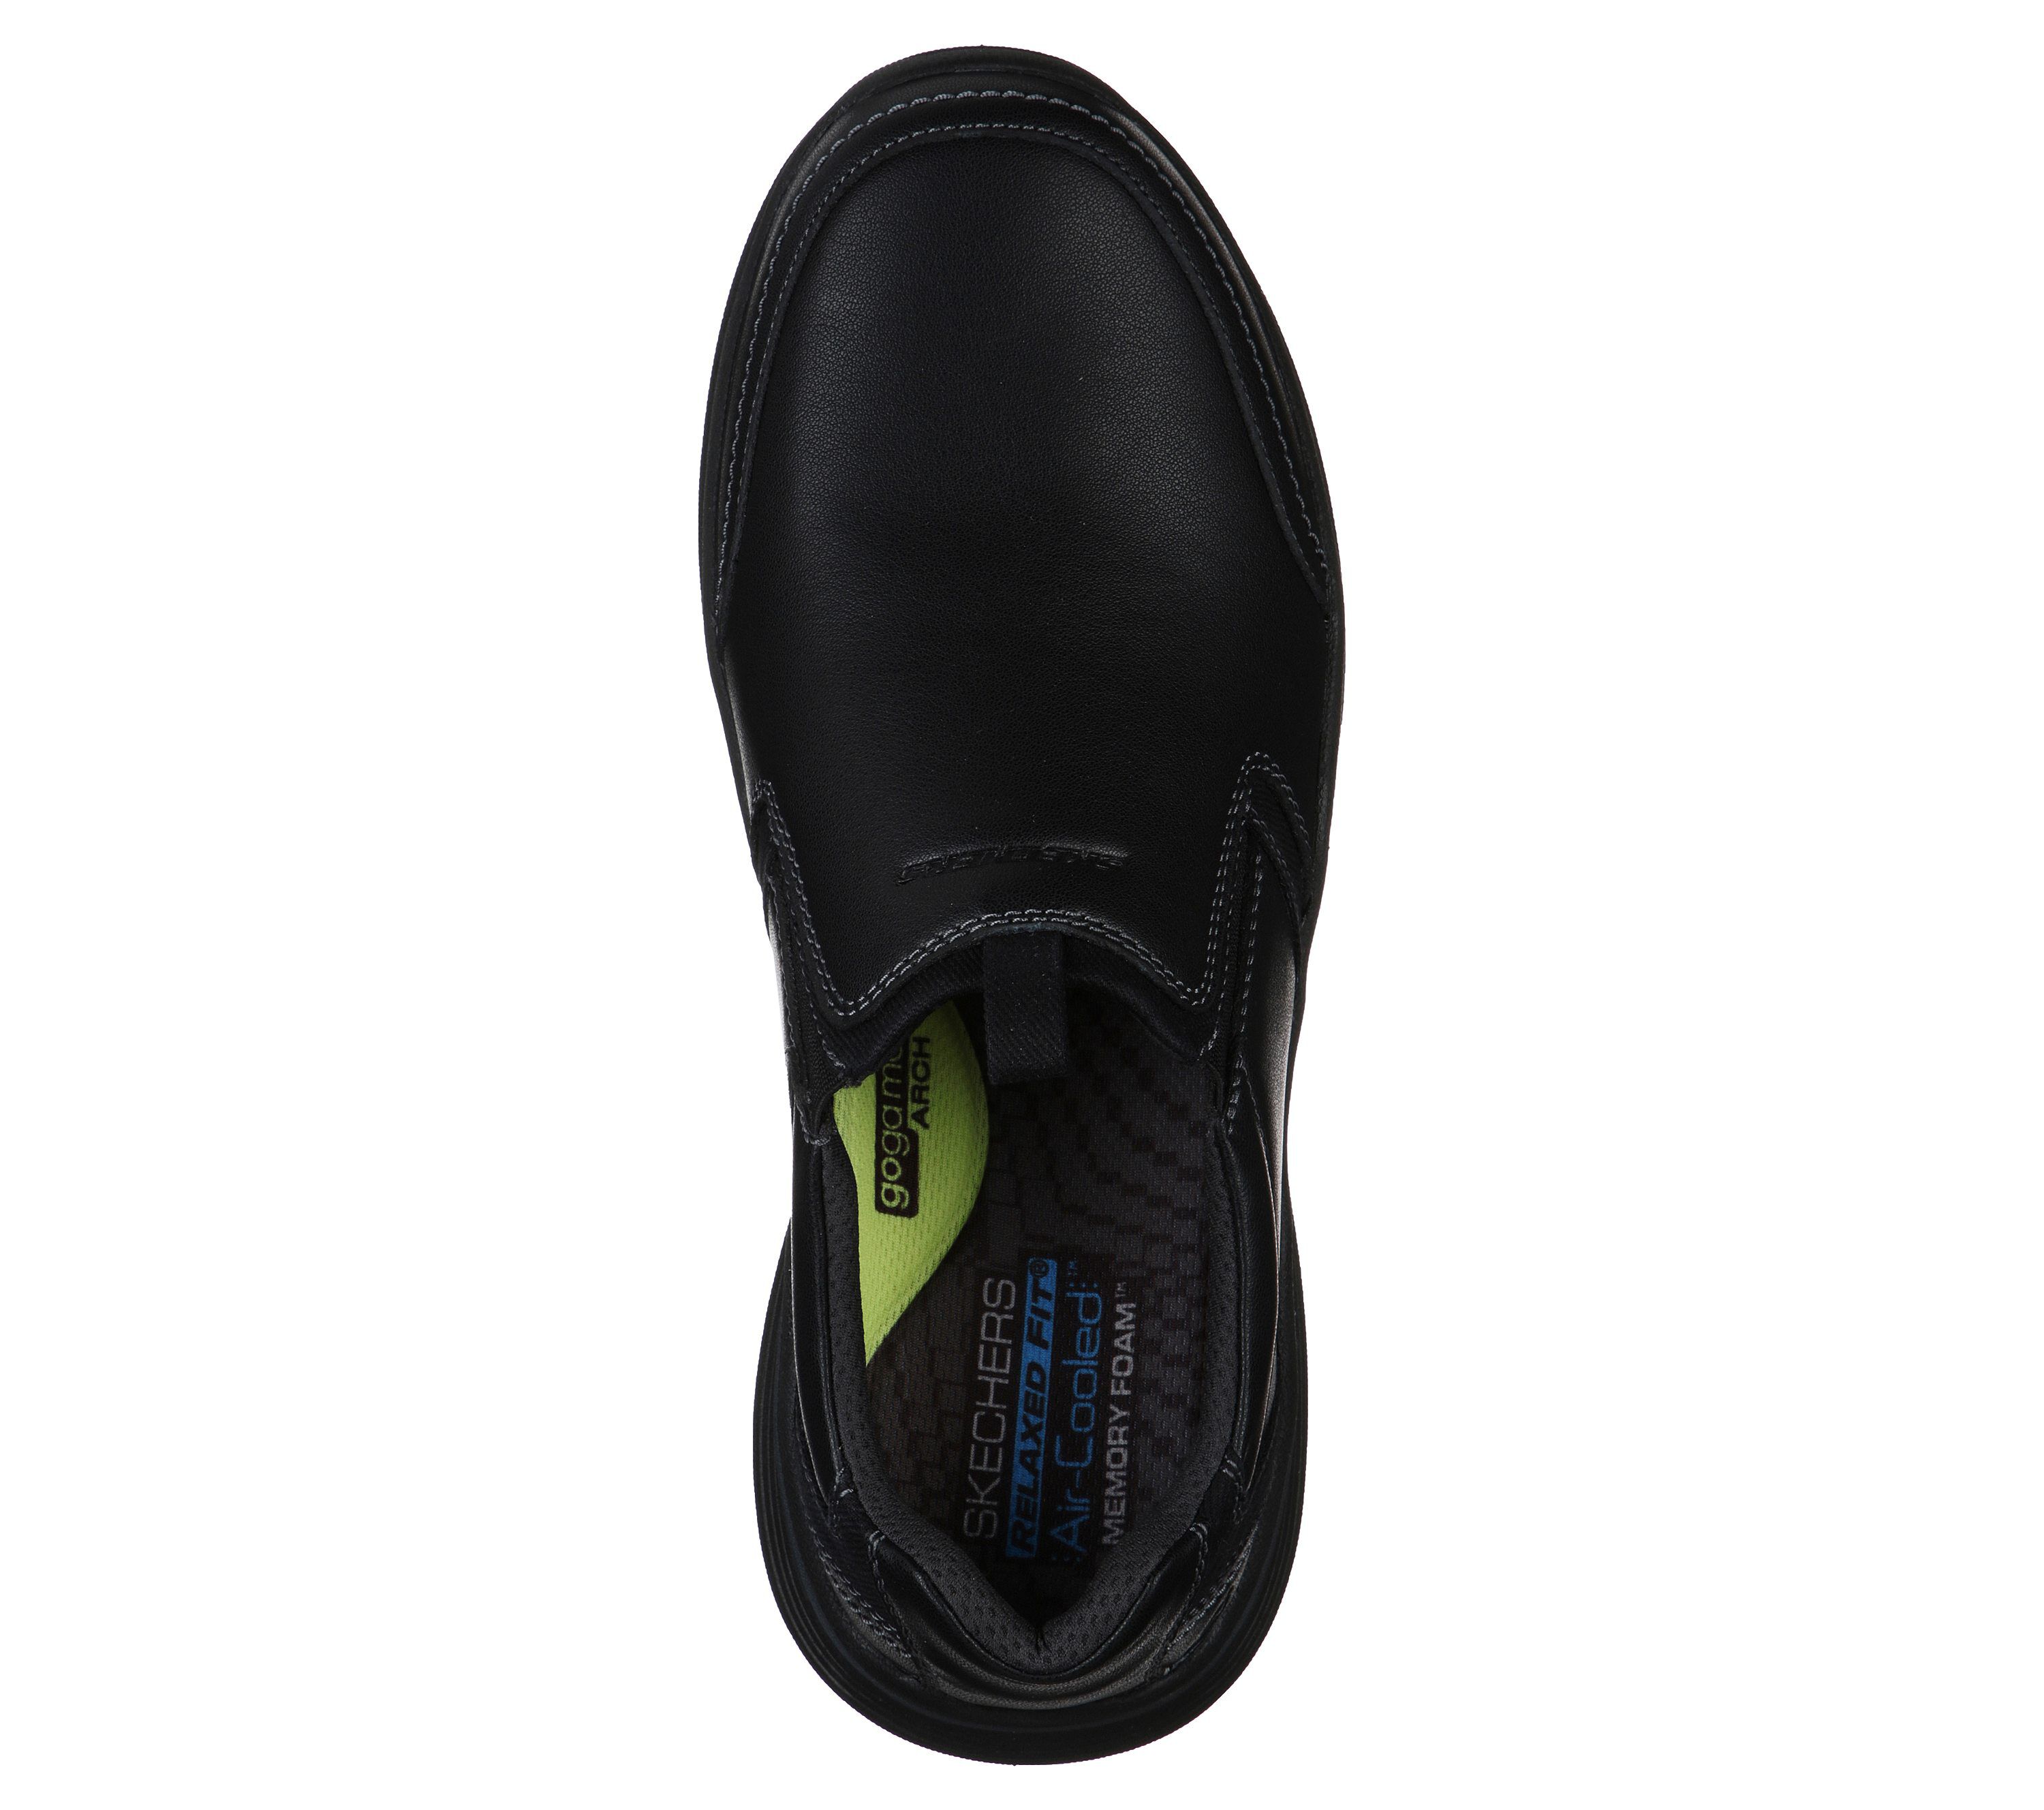 Shop the Relaxed Fit: Expended - Morgo | SKECHERS